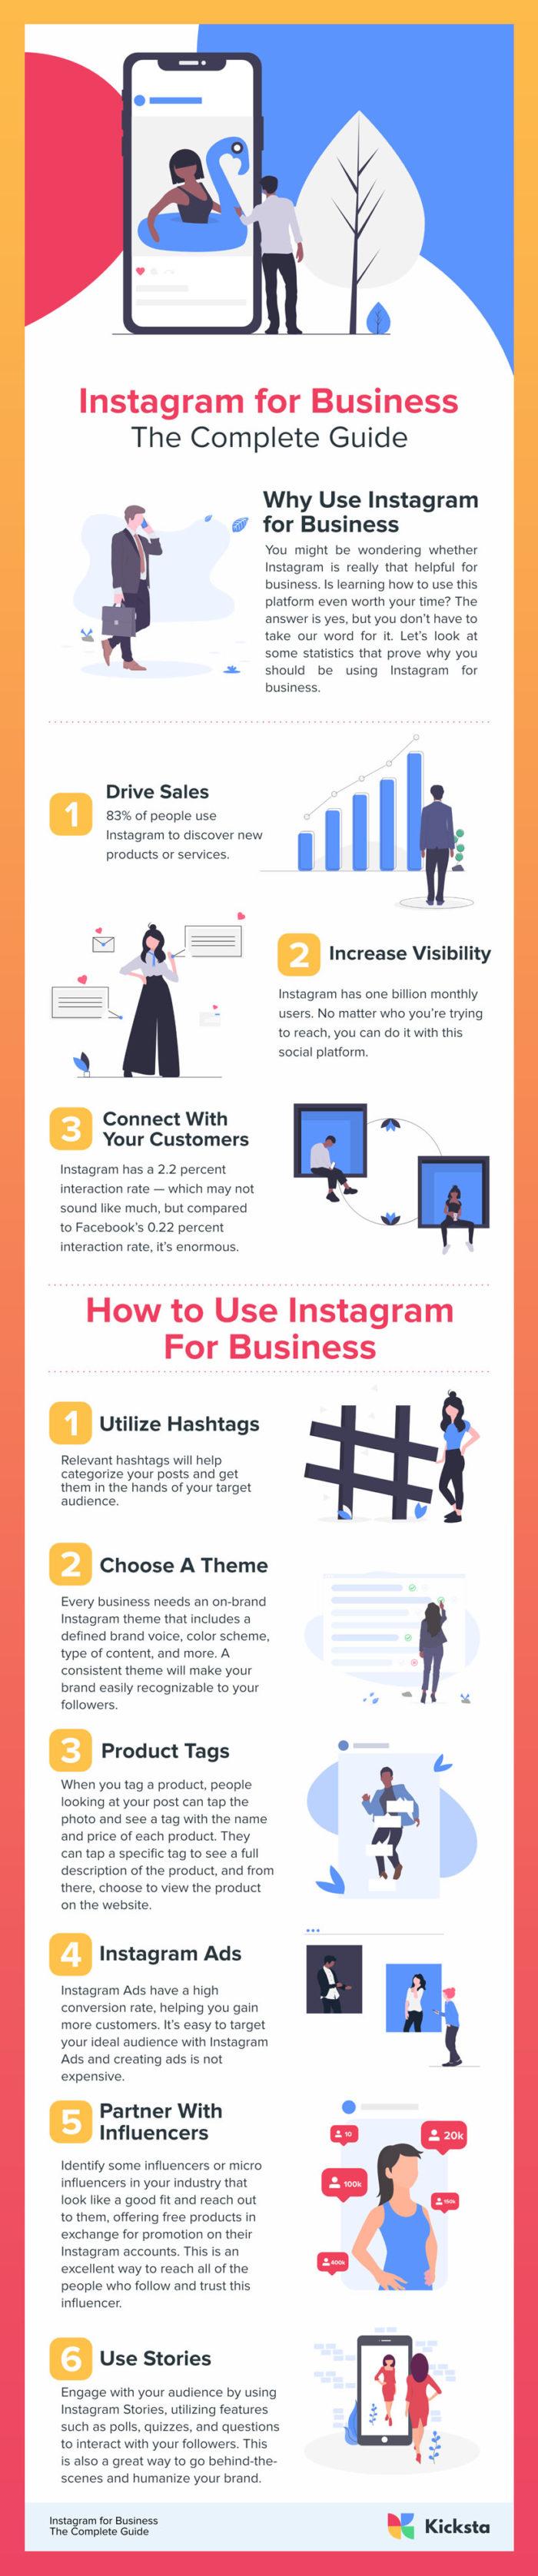 Instagram for Business Infographic